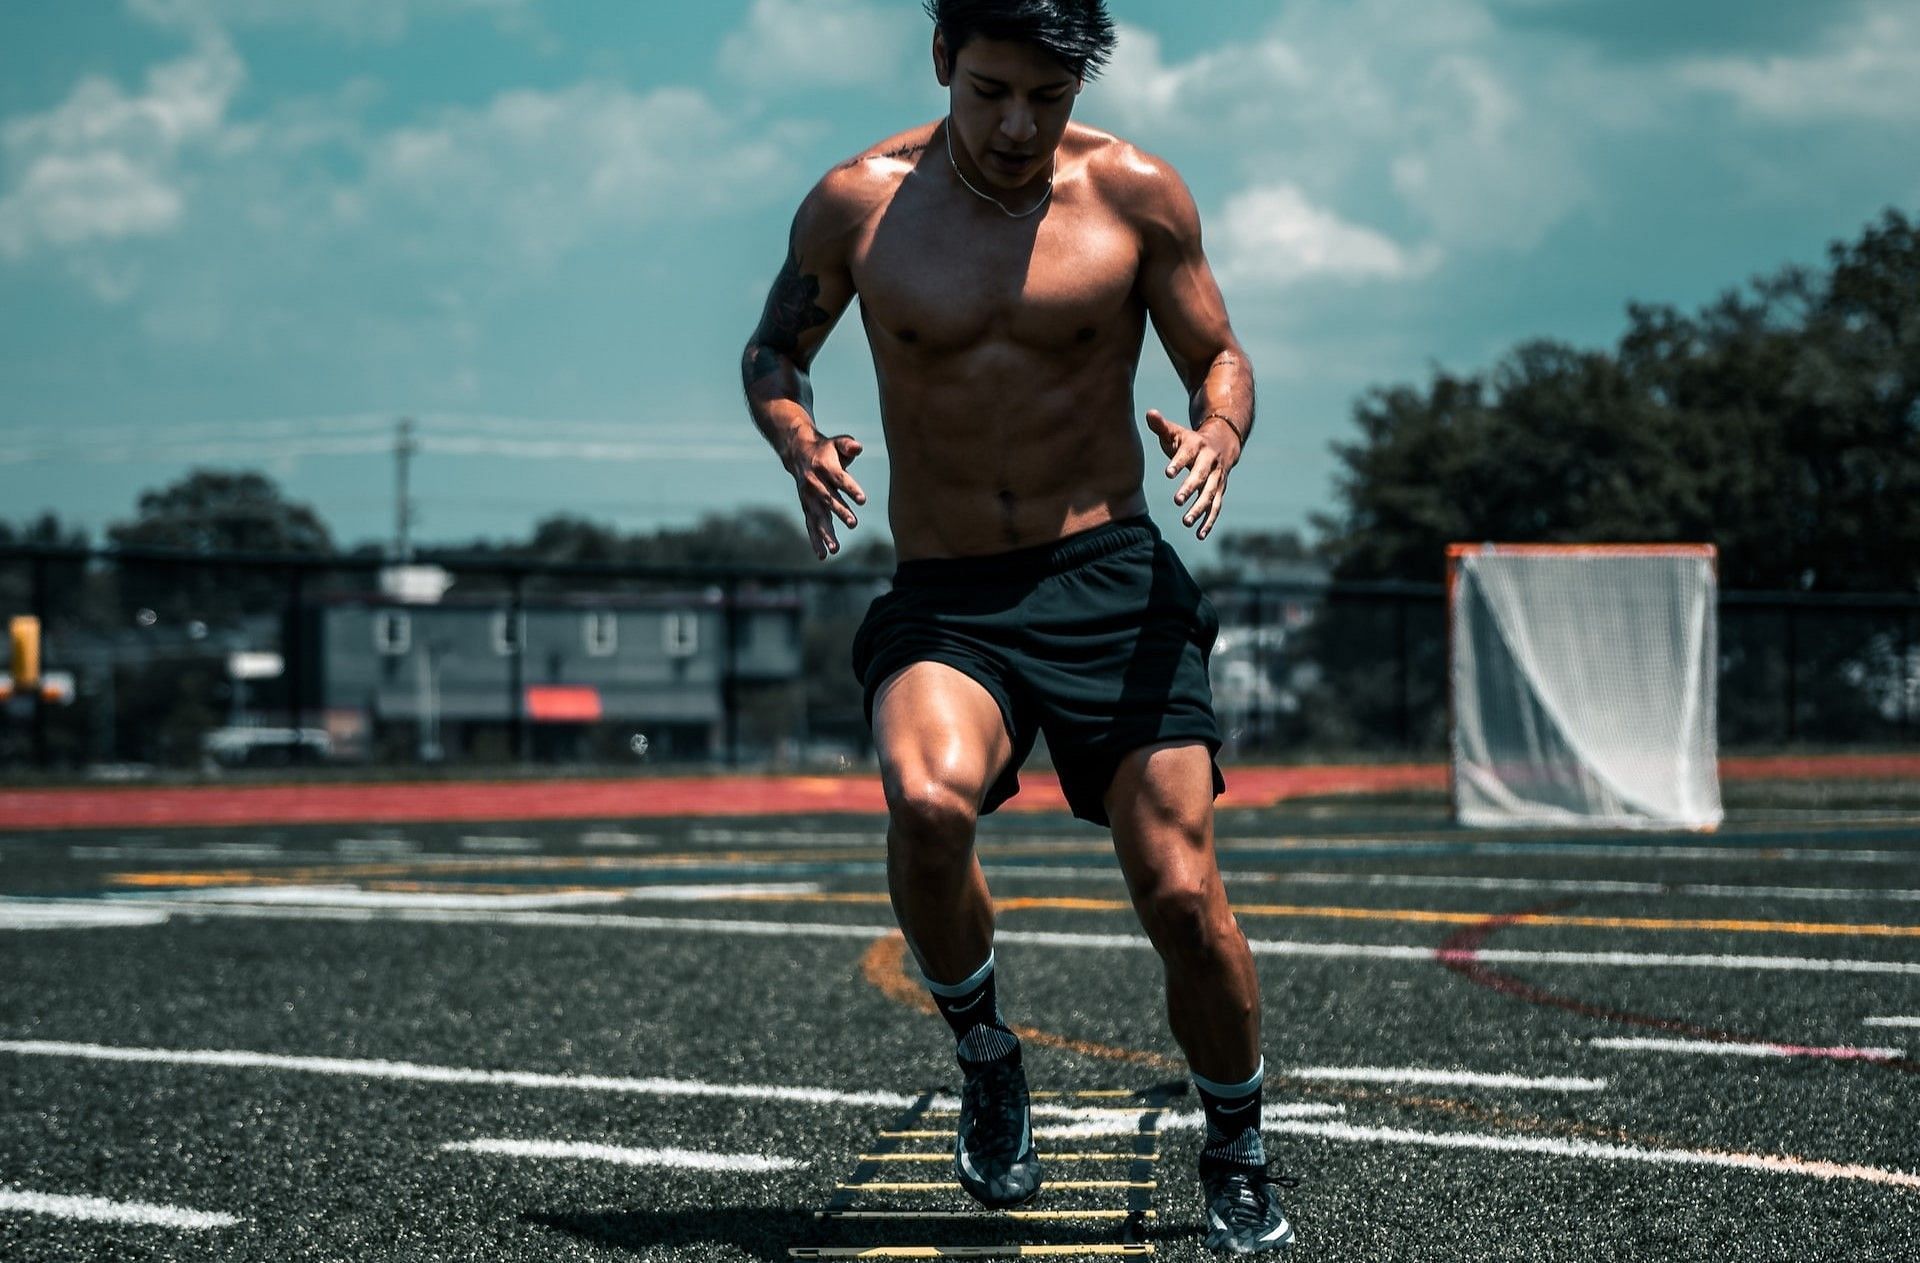 Which Is Better For Athletes: Full Body Vs. Split Body Workout? – DMoose